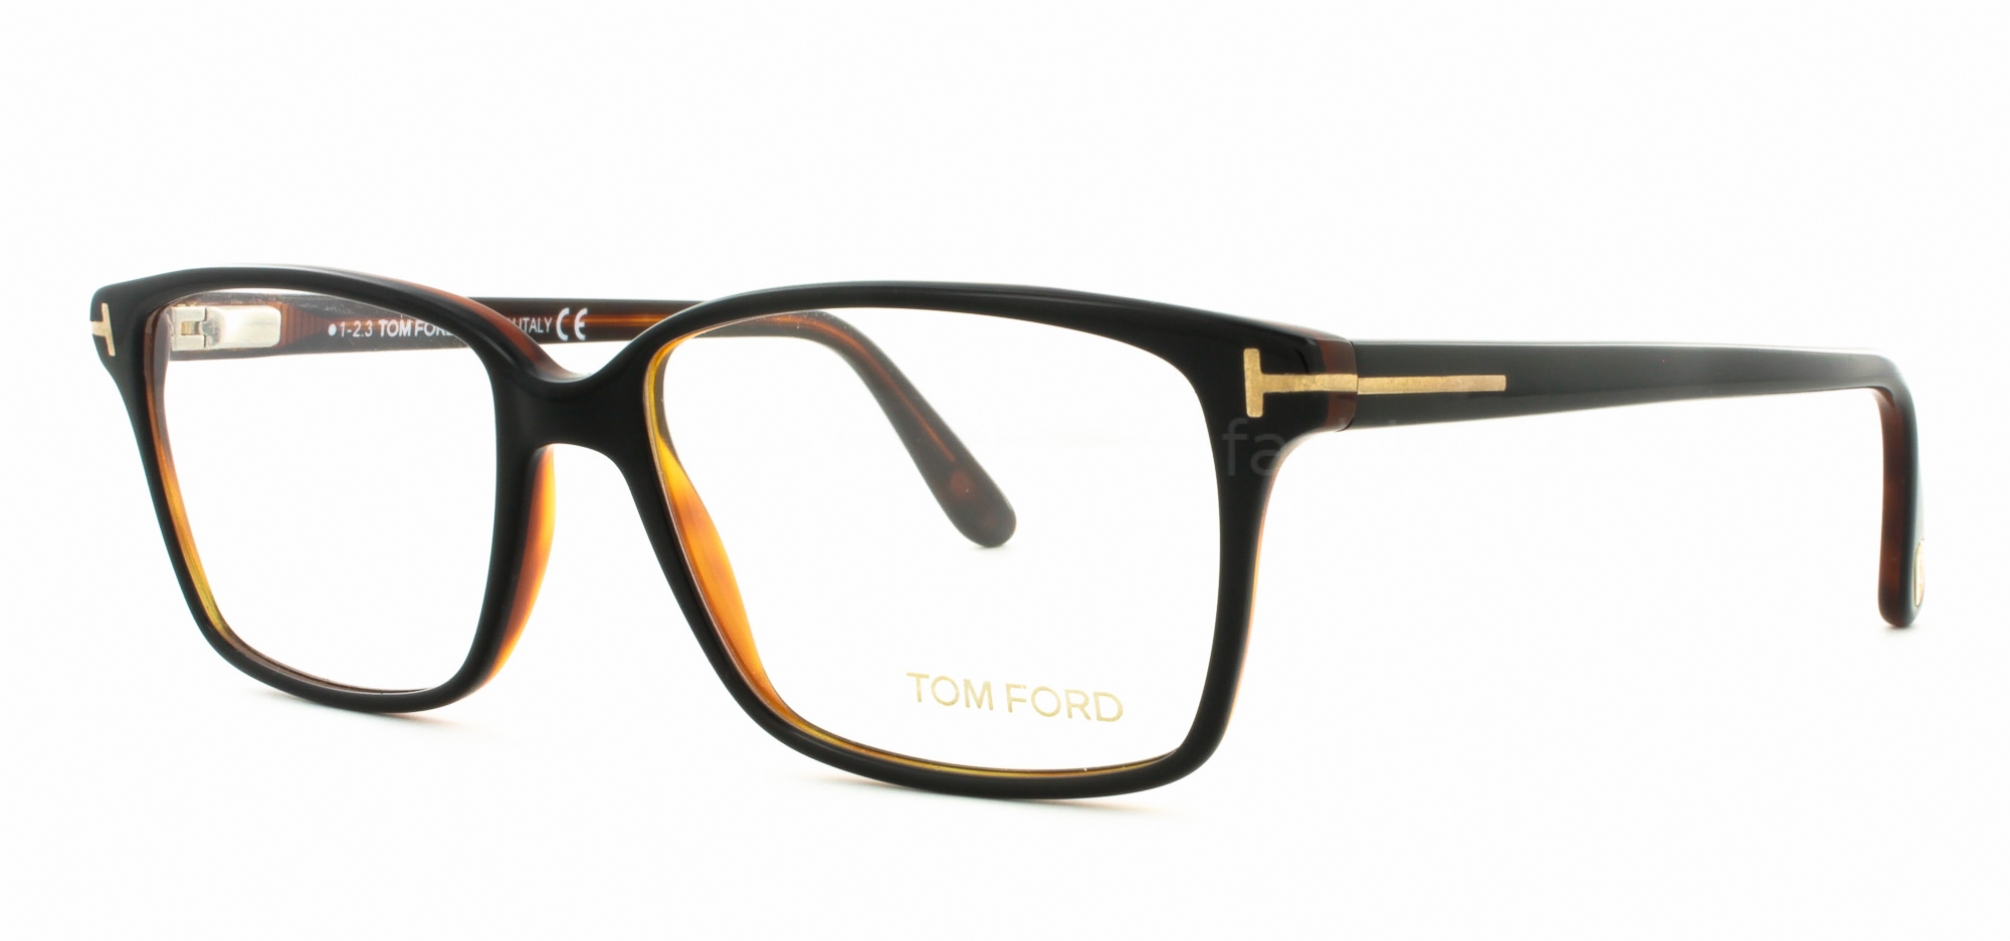 Buy Tom Ford Eyeglasses directly from OpticsFast.com